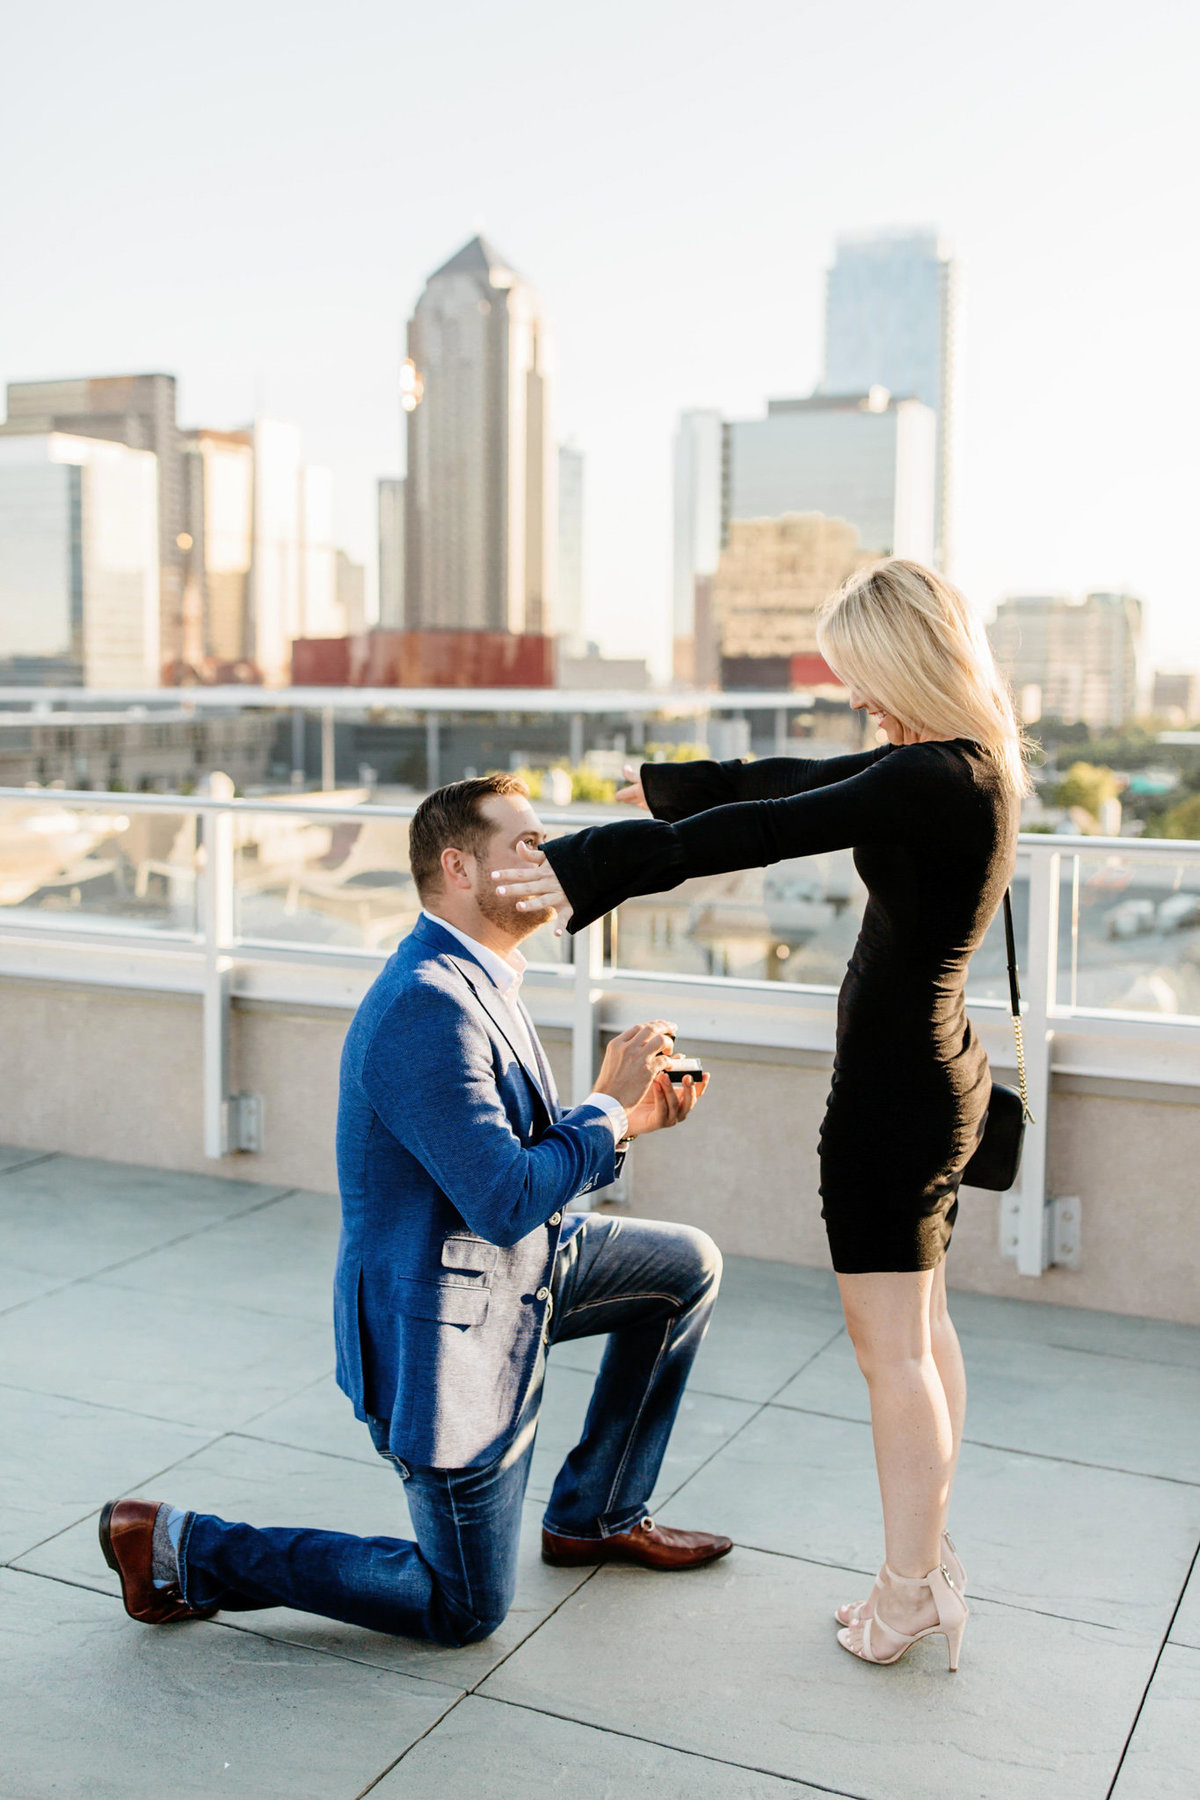 Eric & Megan - Downtown Dallas Rooftop Proposal & Engagement Session-31